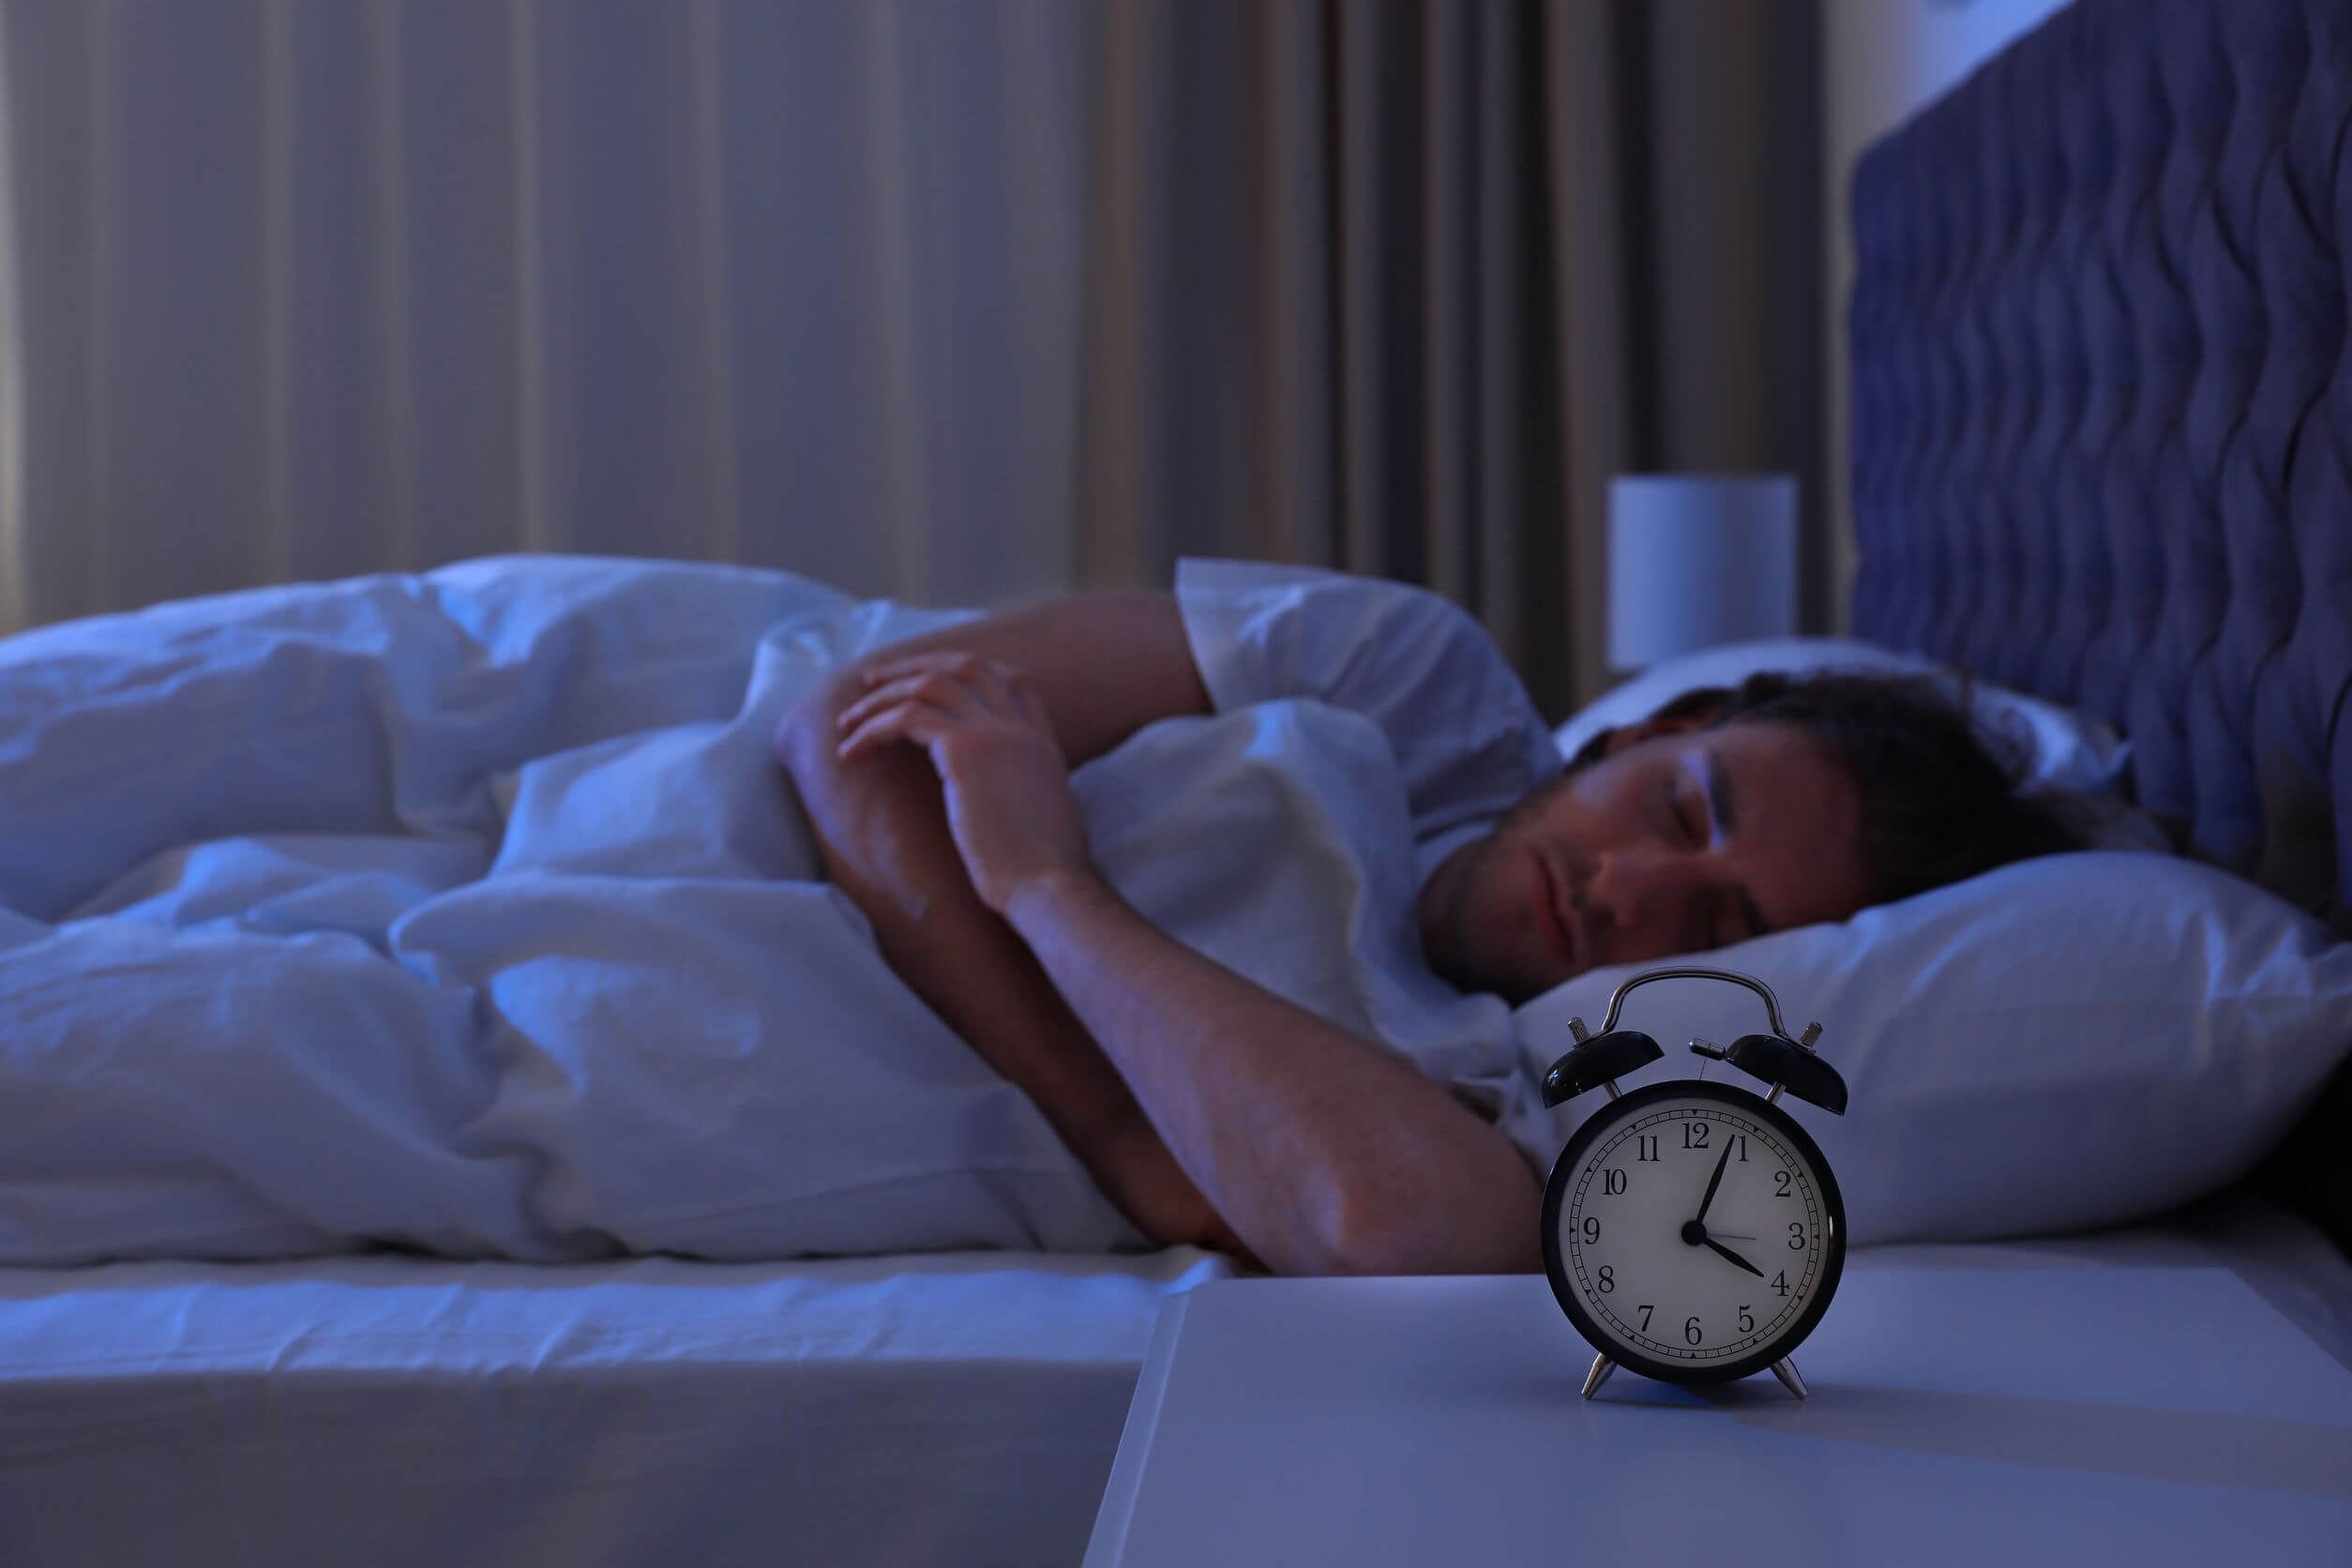 Keys to improving concentration include getting a good night's sleep.